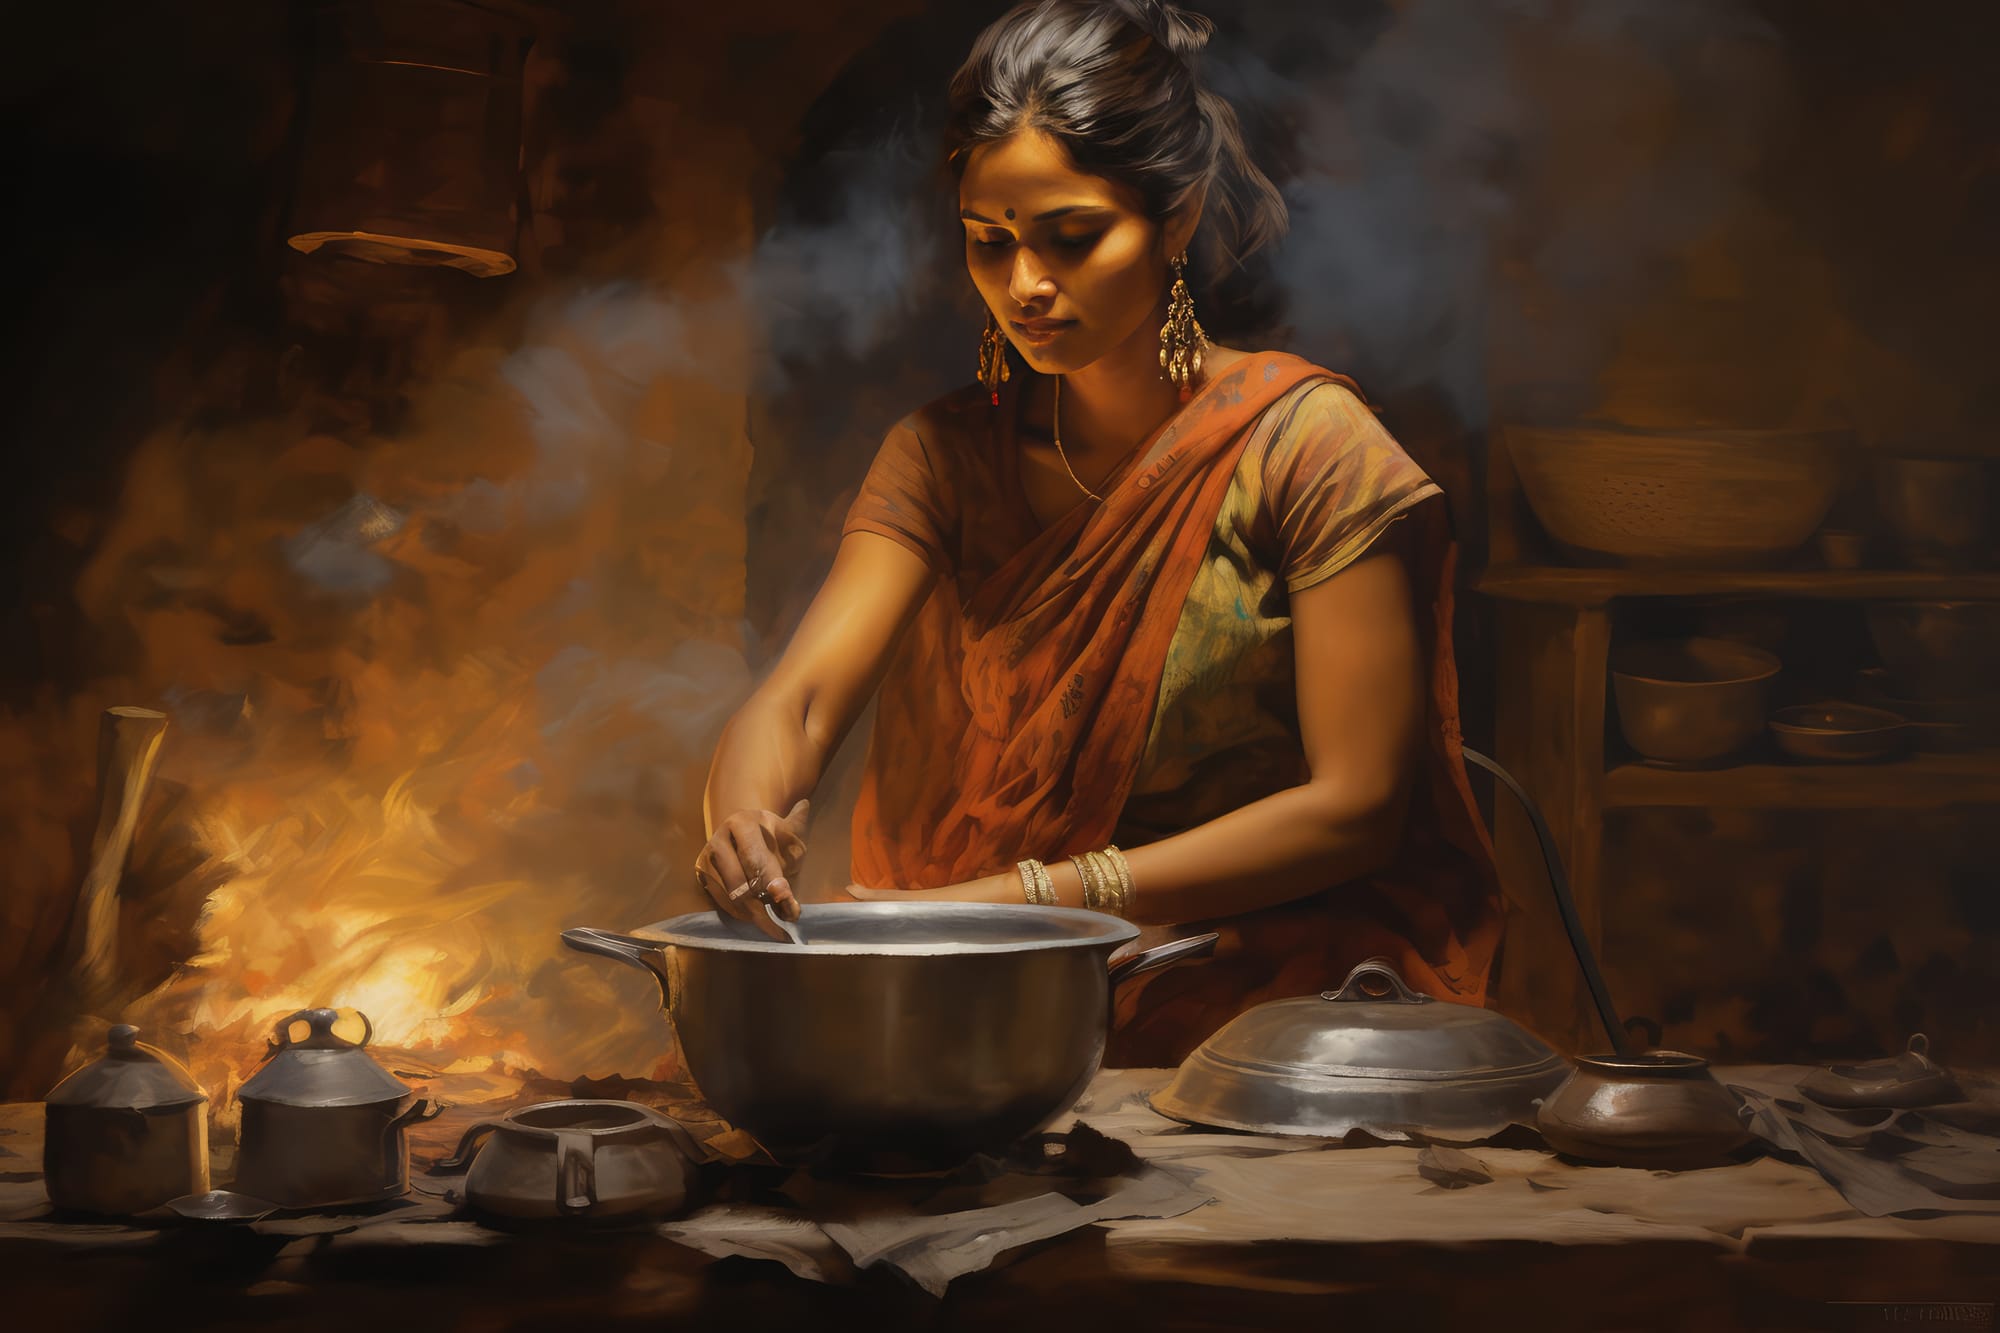 traditional cooking in ancient India